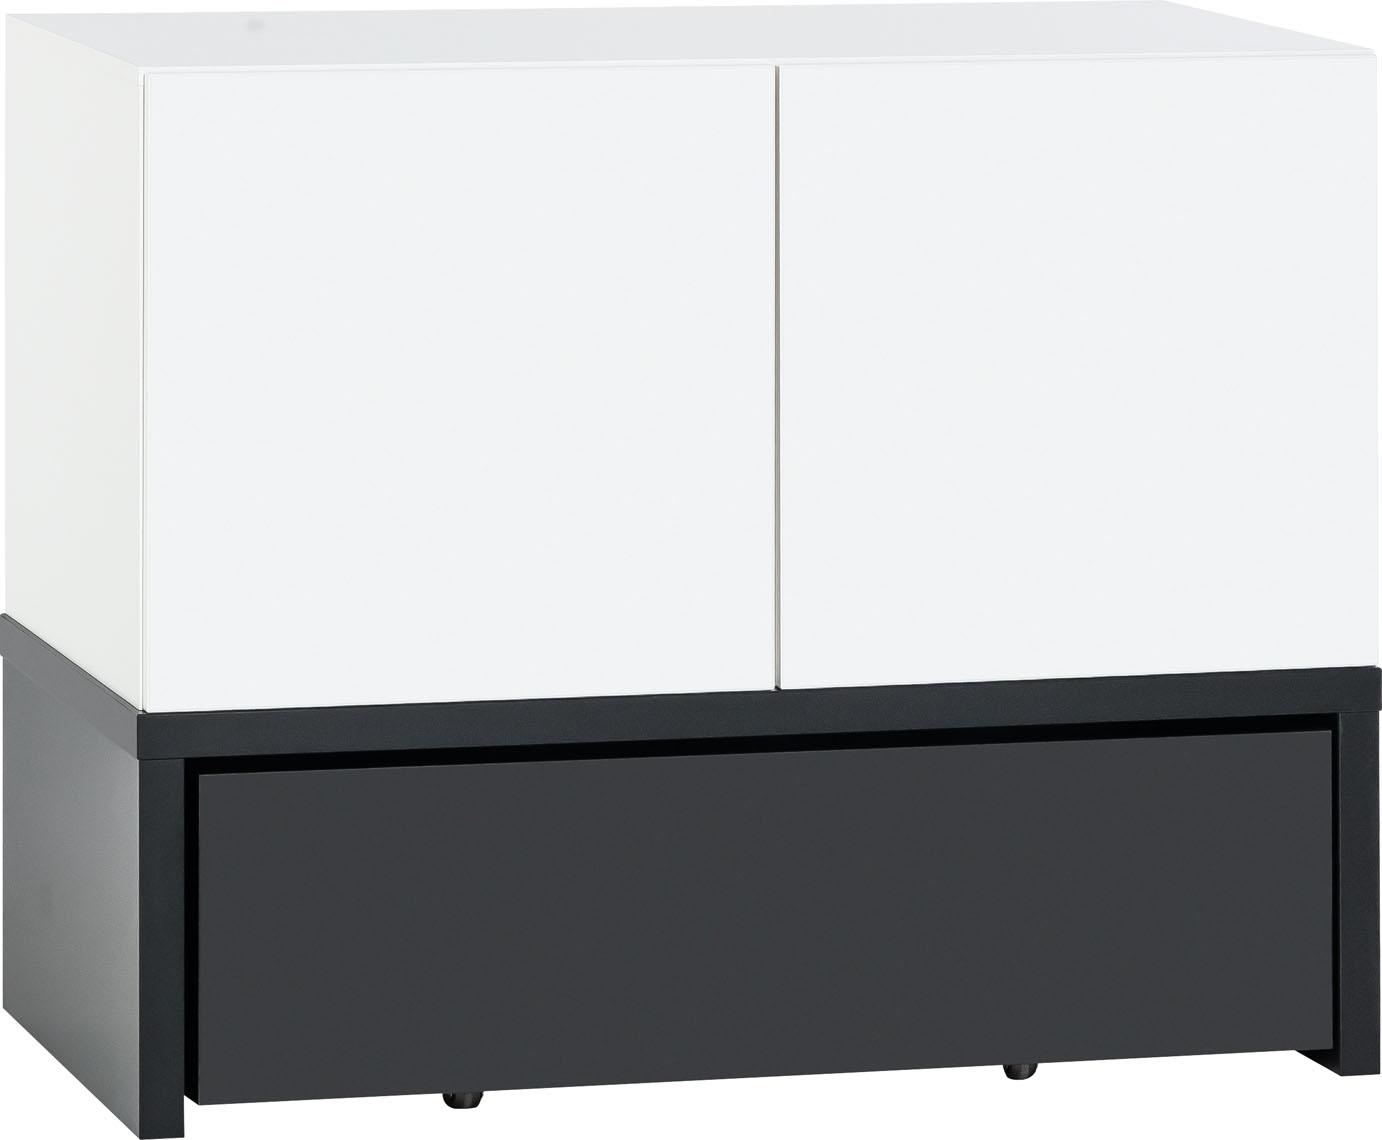 2-door cabinet with base 106x53 and drawer Young Users